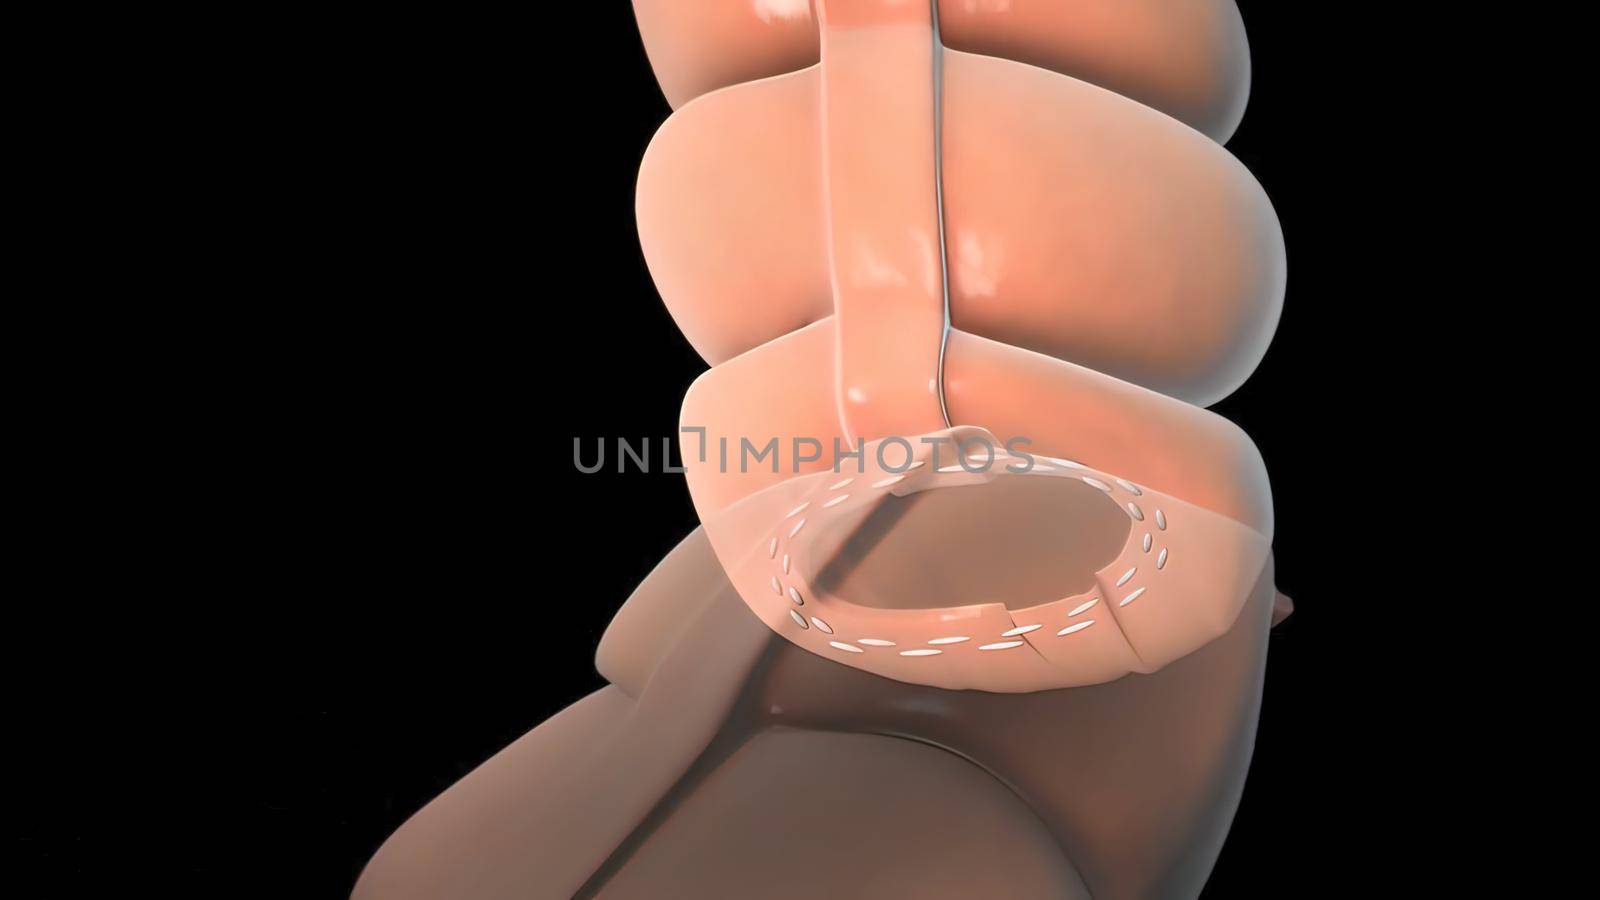 surgery to remove any part of the intestines, bowel resection 3D illustration